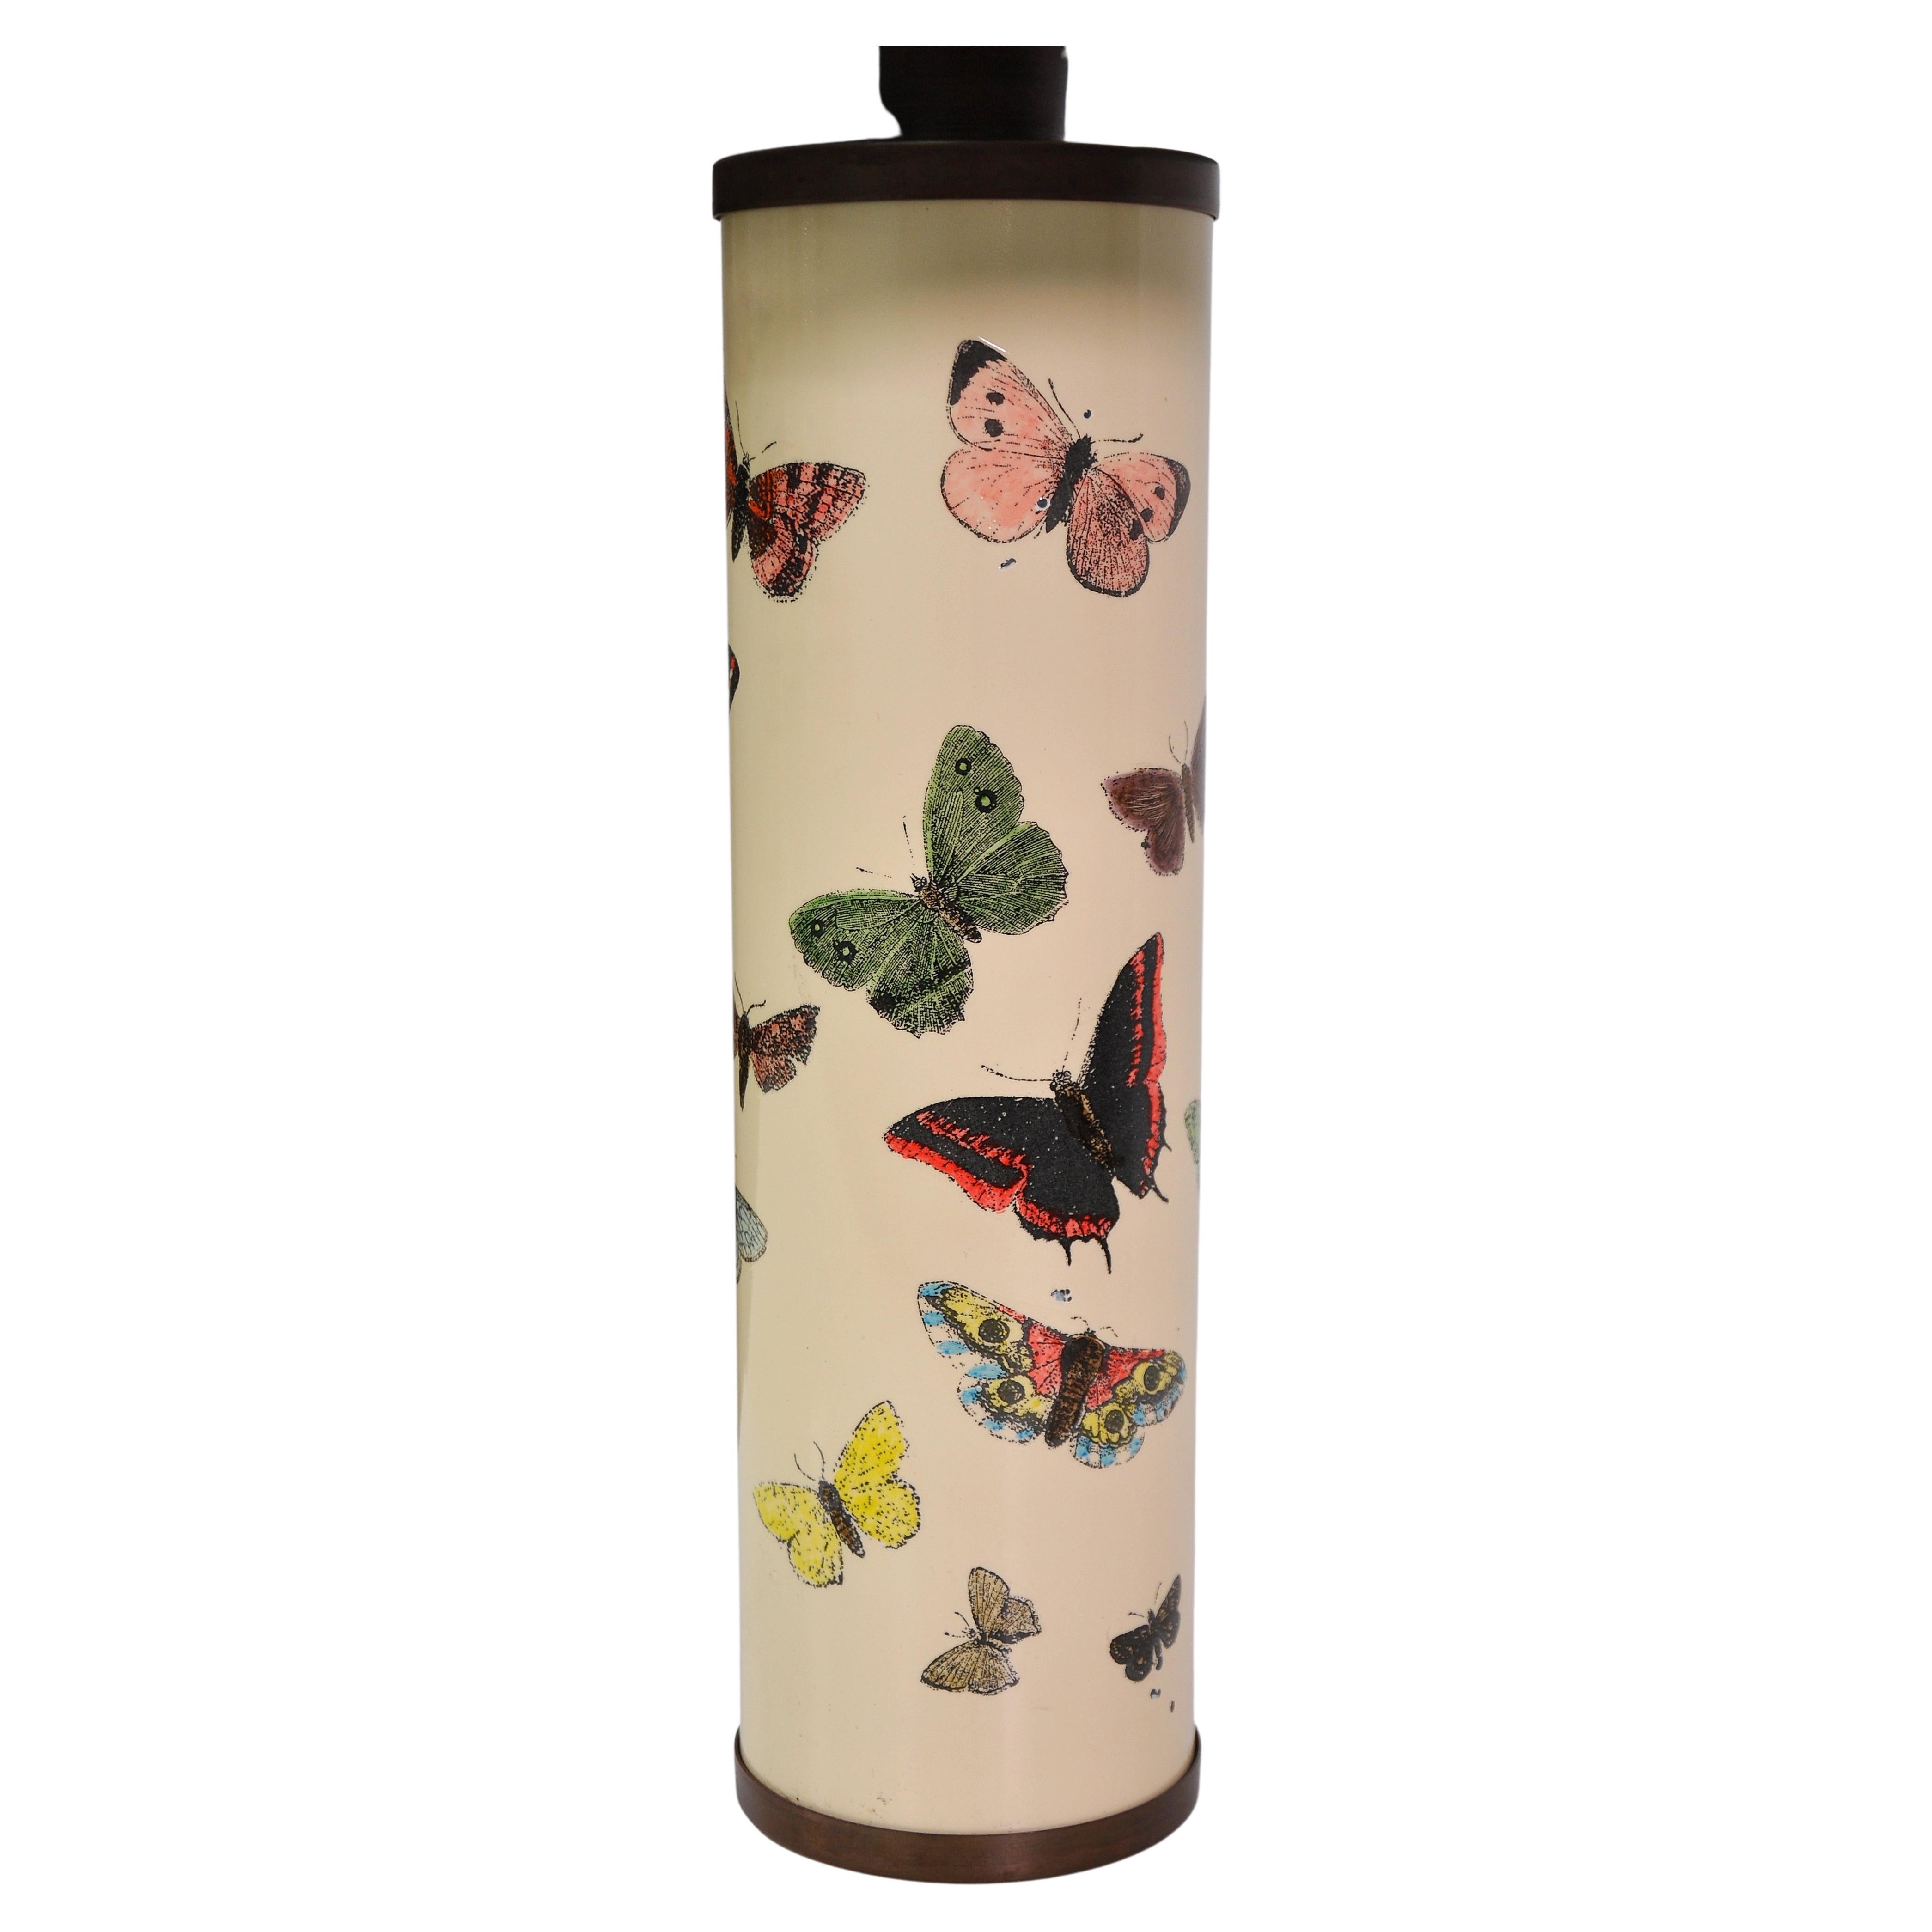 A vintage Mid-Century Modern off-white lamp by the Italian master of playful and surreal self-expression, Piero Fornasetti. The brass lamp features screen-printed green, blue, pink and yellow butterflies on a cream ivory background. Height to socket